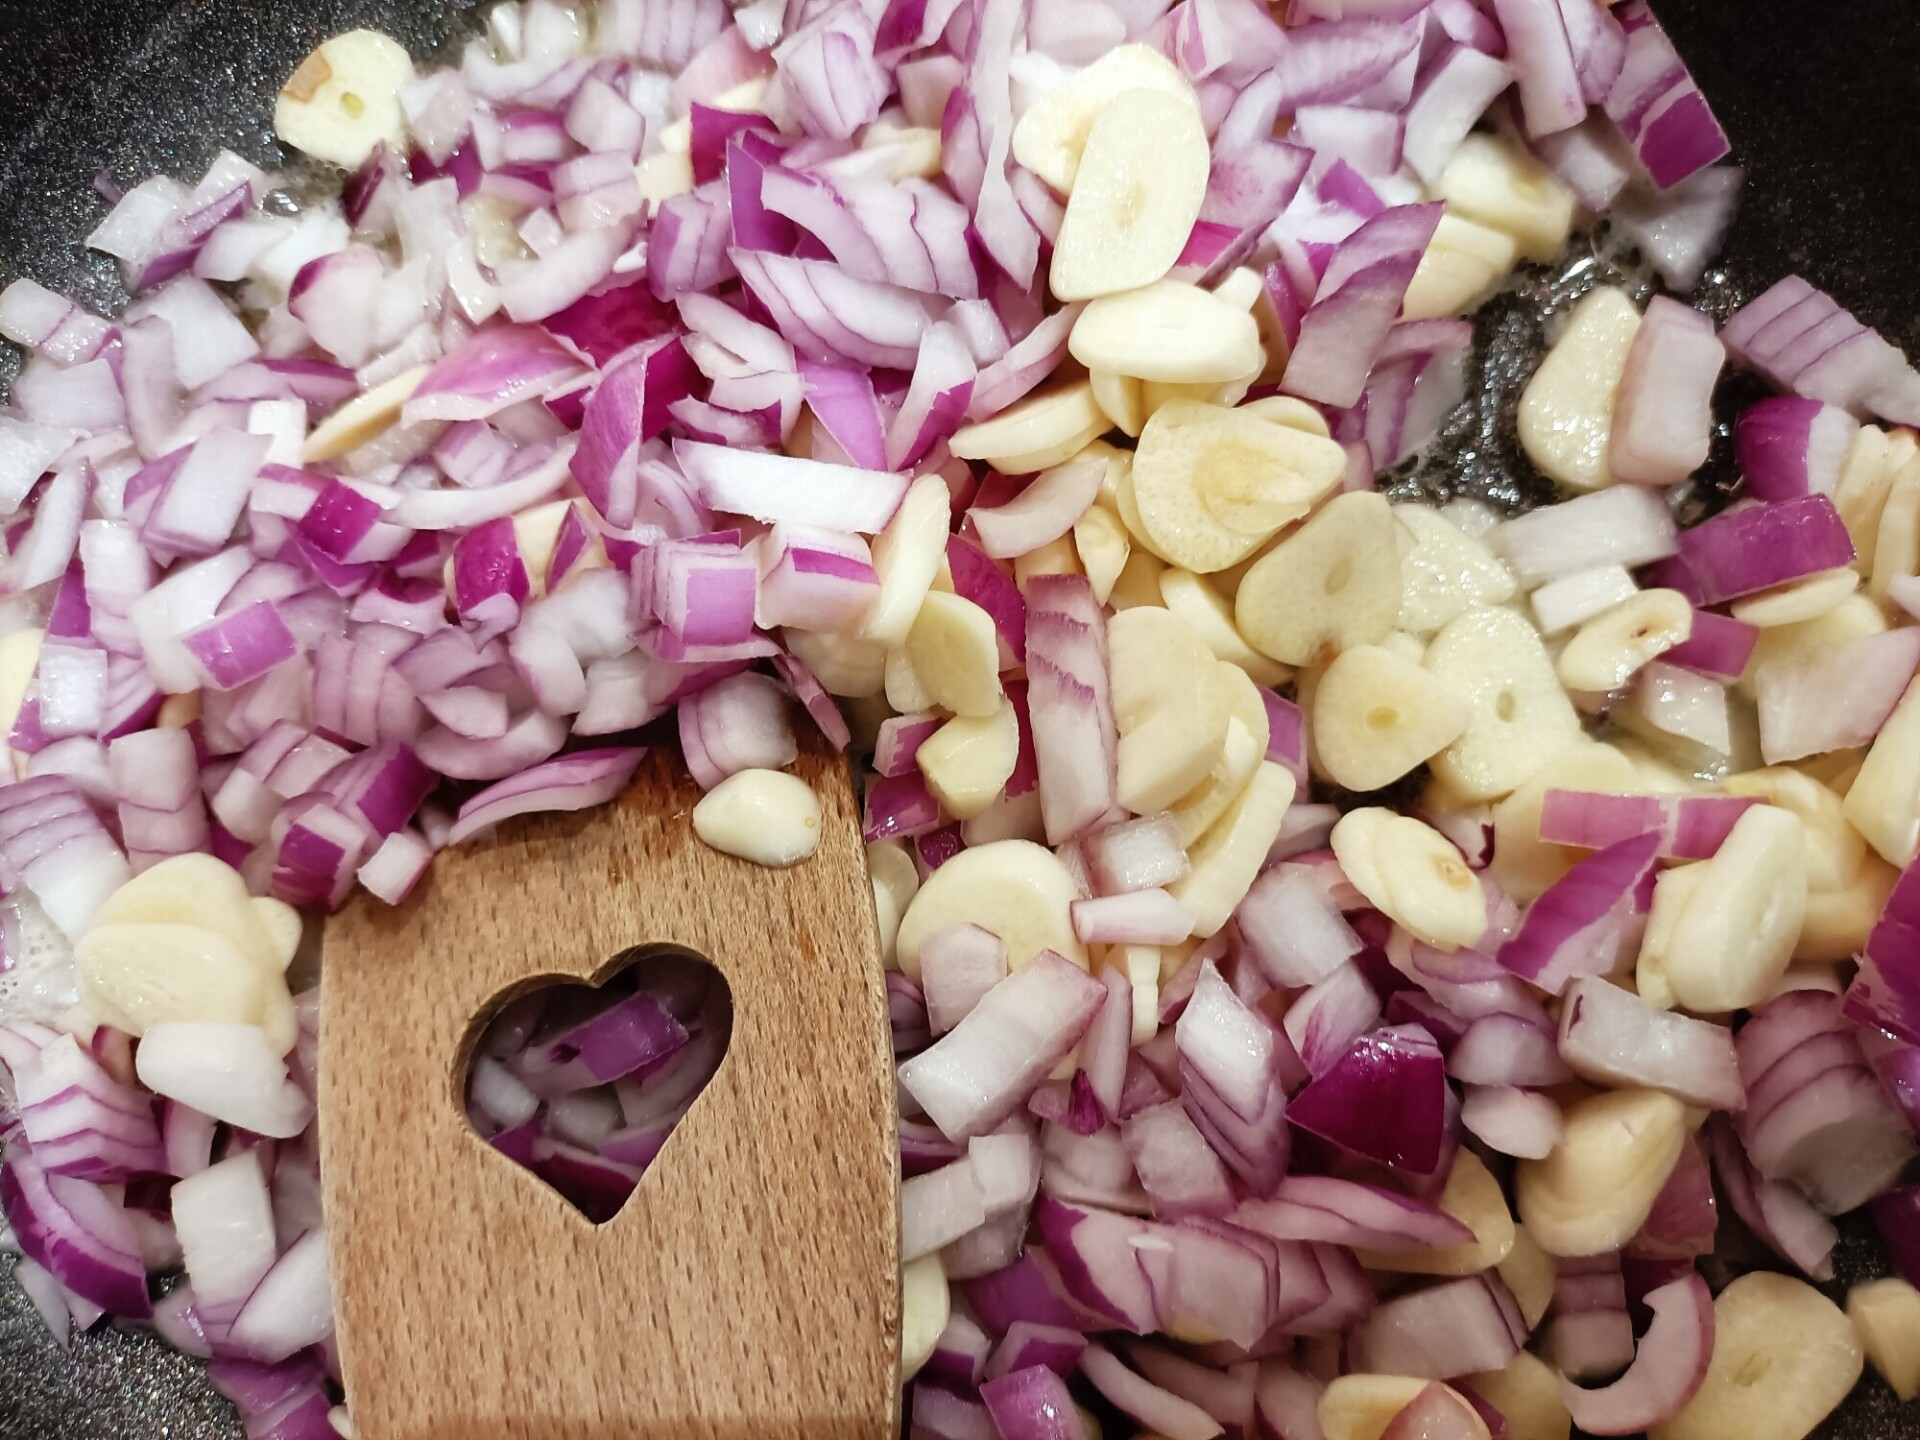 Finely chopped onions and garlic